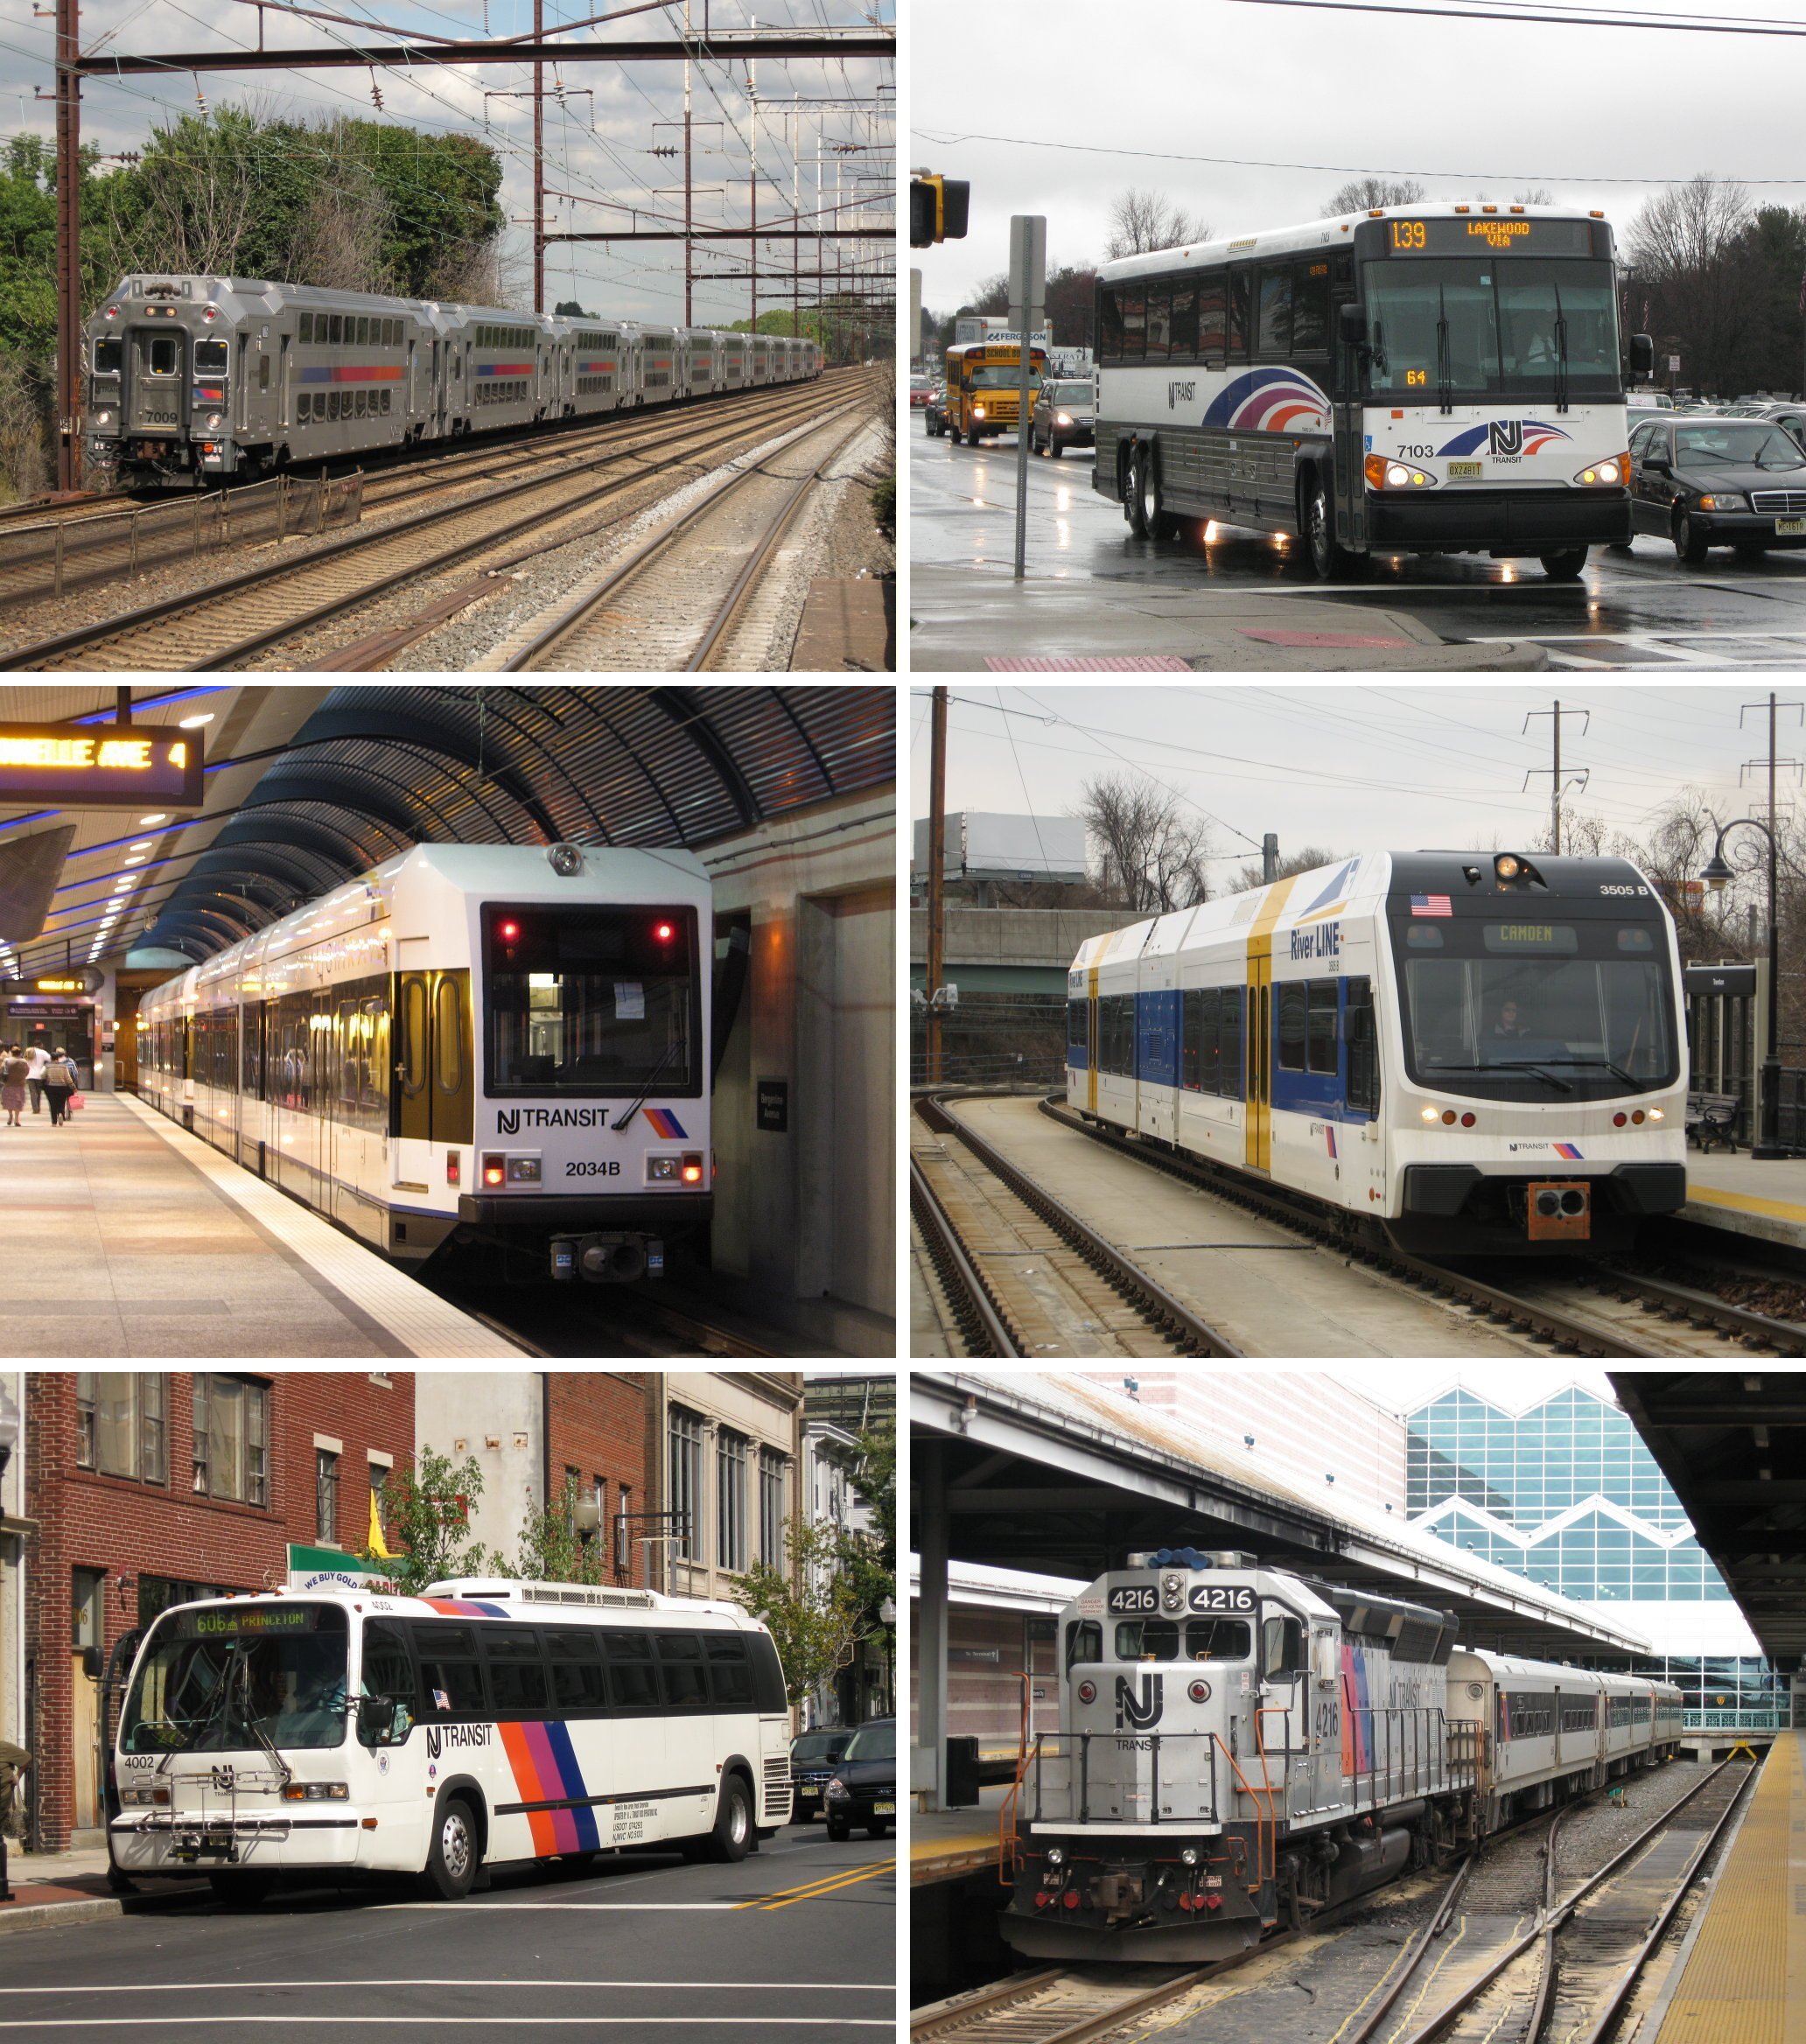 New Jersey Transit Corporation, branded as NJ Transit or NJTransit and often shortened to NJT, is a state-owned public transportation system that serves the U.S. state of New Jersey and portions of the state of New York and Pennsylvania. It operates bus, light rail, and commuter rail services throughout the state, connecting to major commercial and employment centers both within the state and in its two adjacent major cities, New York City and Philadelphia. In 2022, the system had a ridership of 175,960,600.
Covering a service area of 5,325 square miles (13,790 km2), NJT is the largest statewide public transit system and the third-largest provider of bus, rail, and light rail transit by ridership in the United States.NJT also acts as a purchasing agency for many private operators in the state; in particular, buses to serve routes not served by the transit agency.